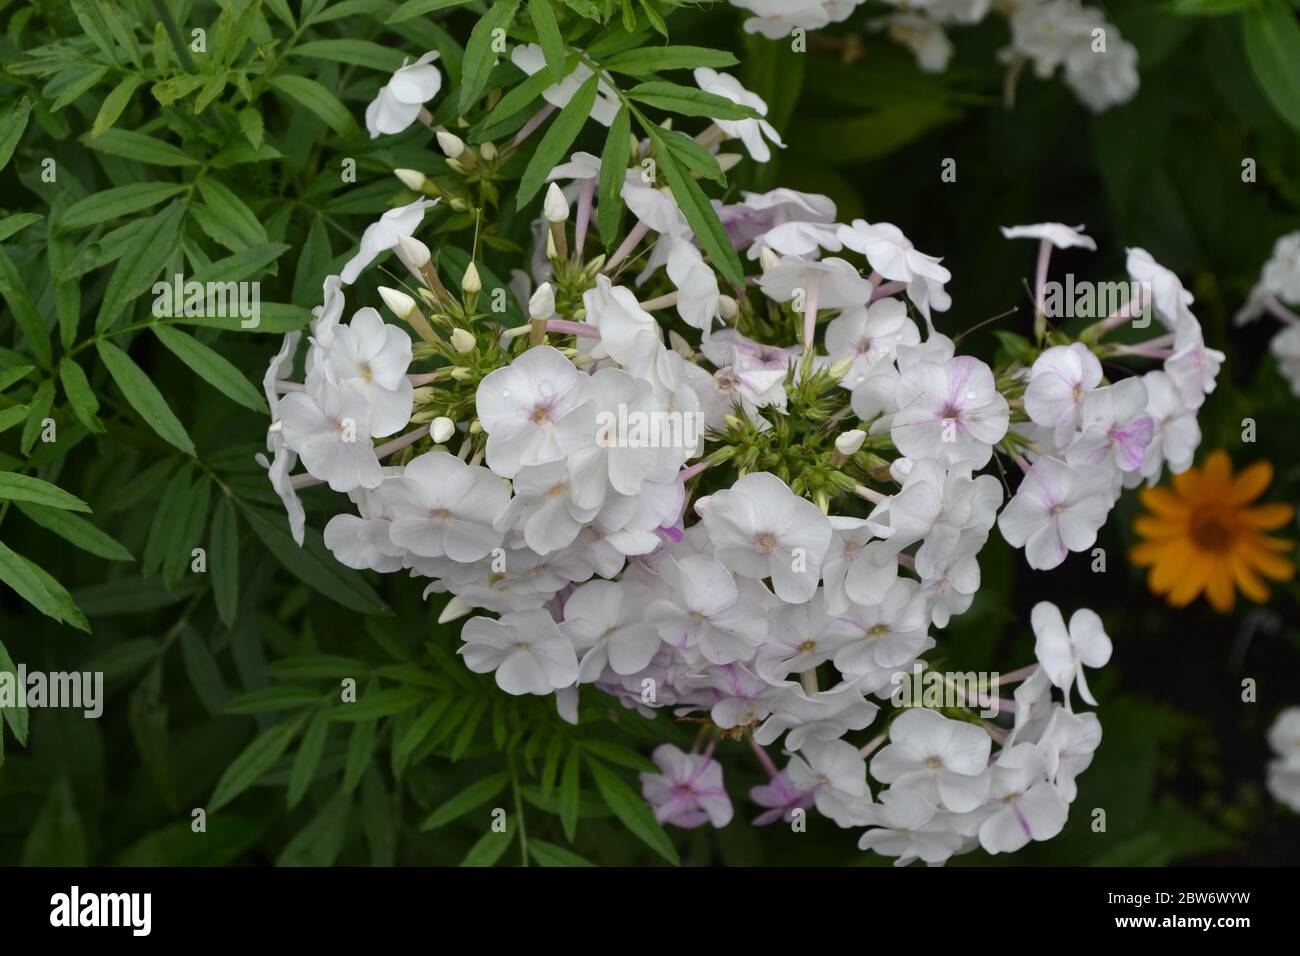 Green. Gardening. Home garden. Beautiful. Phlox flower. Perennial herbaceous plant. High branches. White flowers Stock Photo